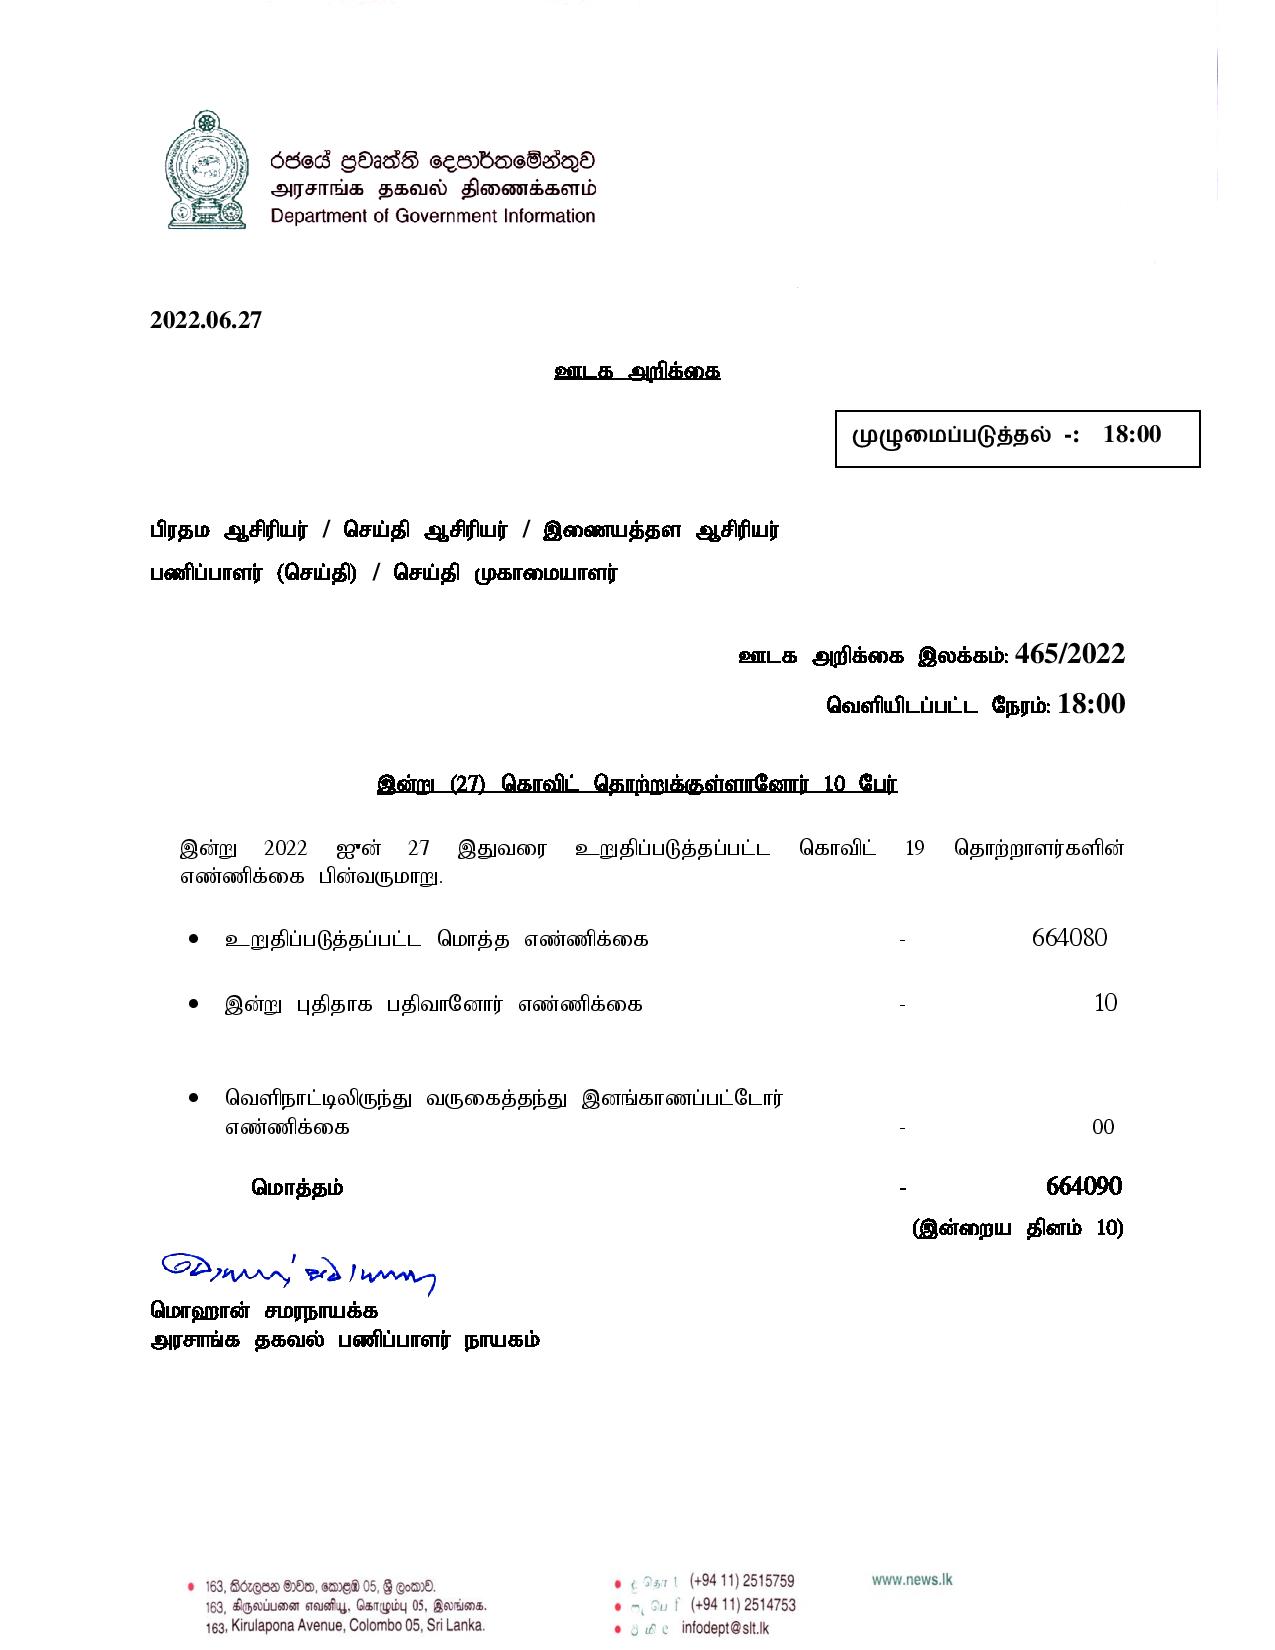 Press Release 465 Tamil page 001